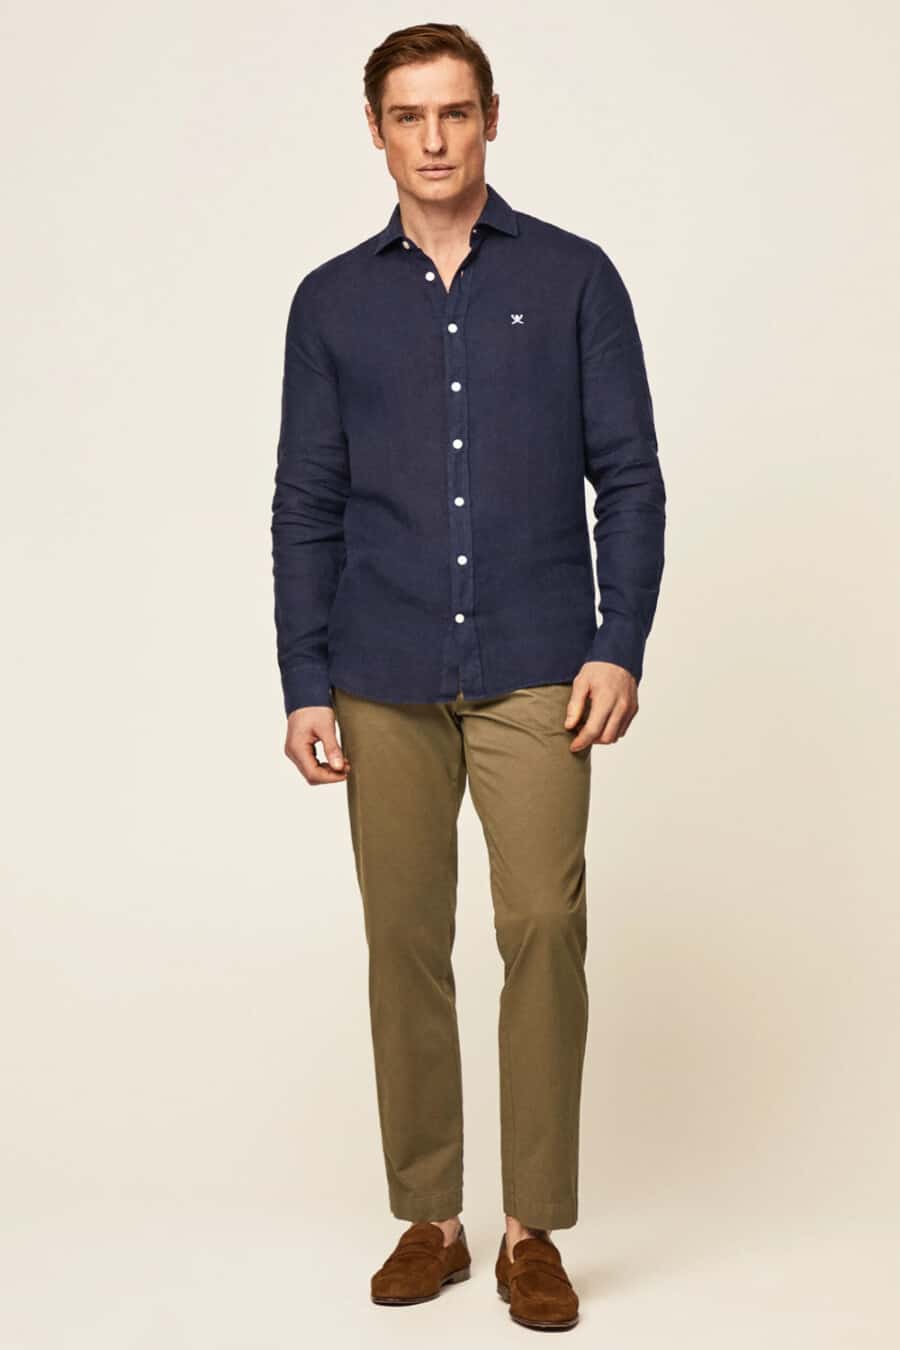 Men's khaki green pants, untucked navy shirt and brown suede penny loafers outfit